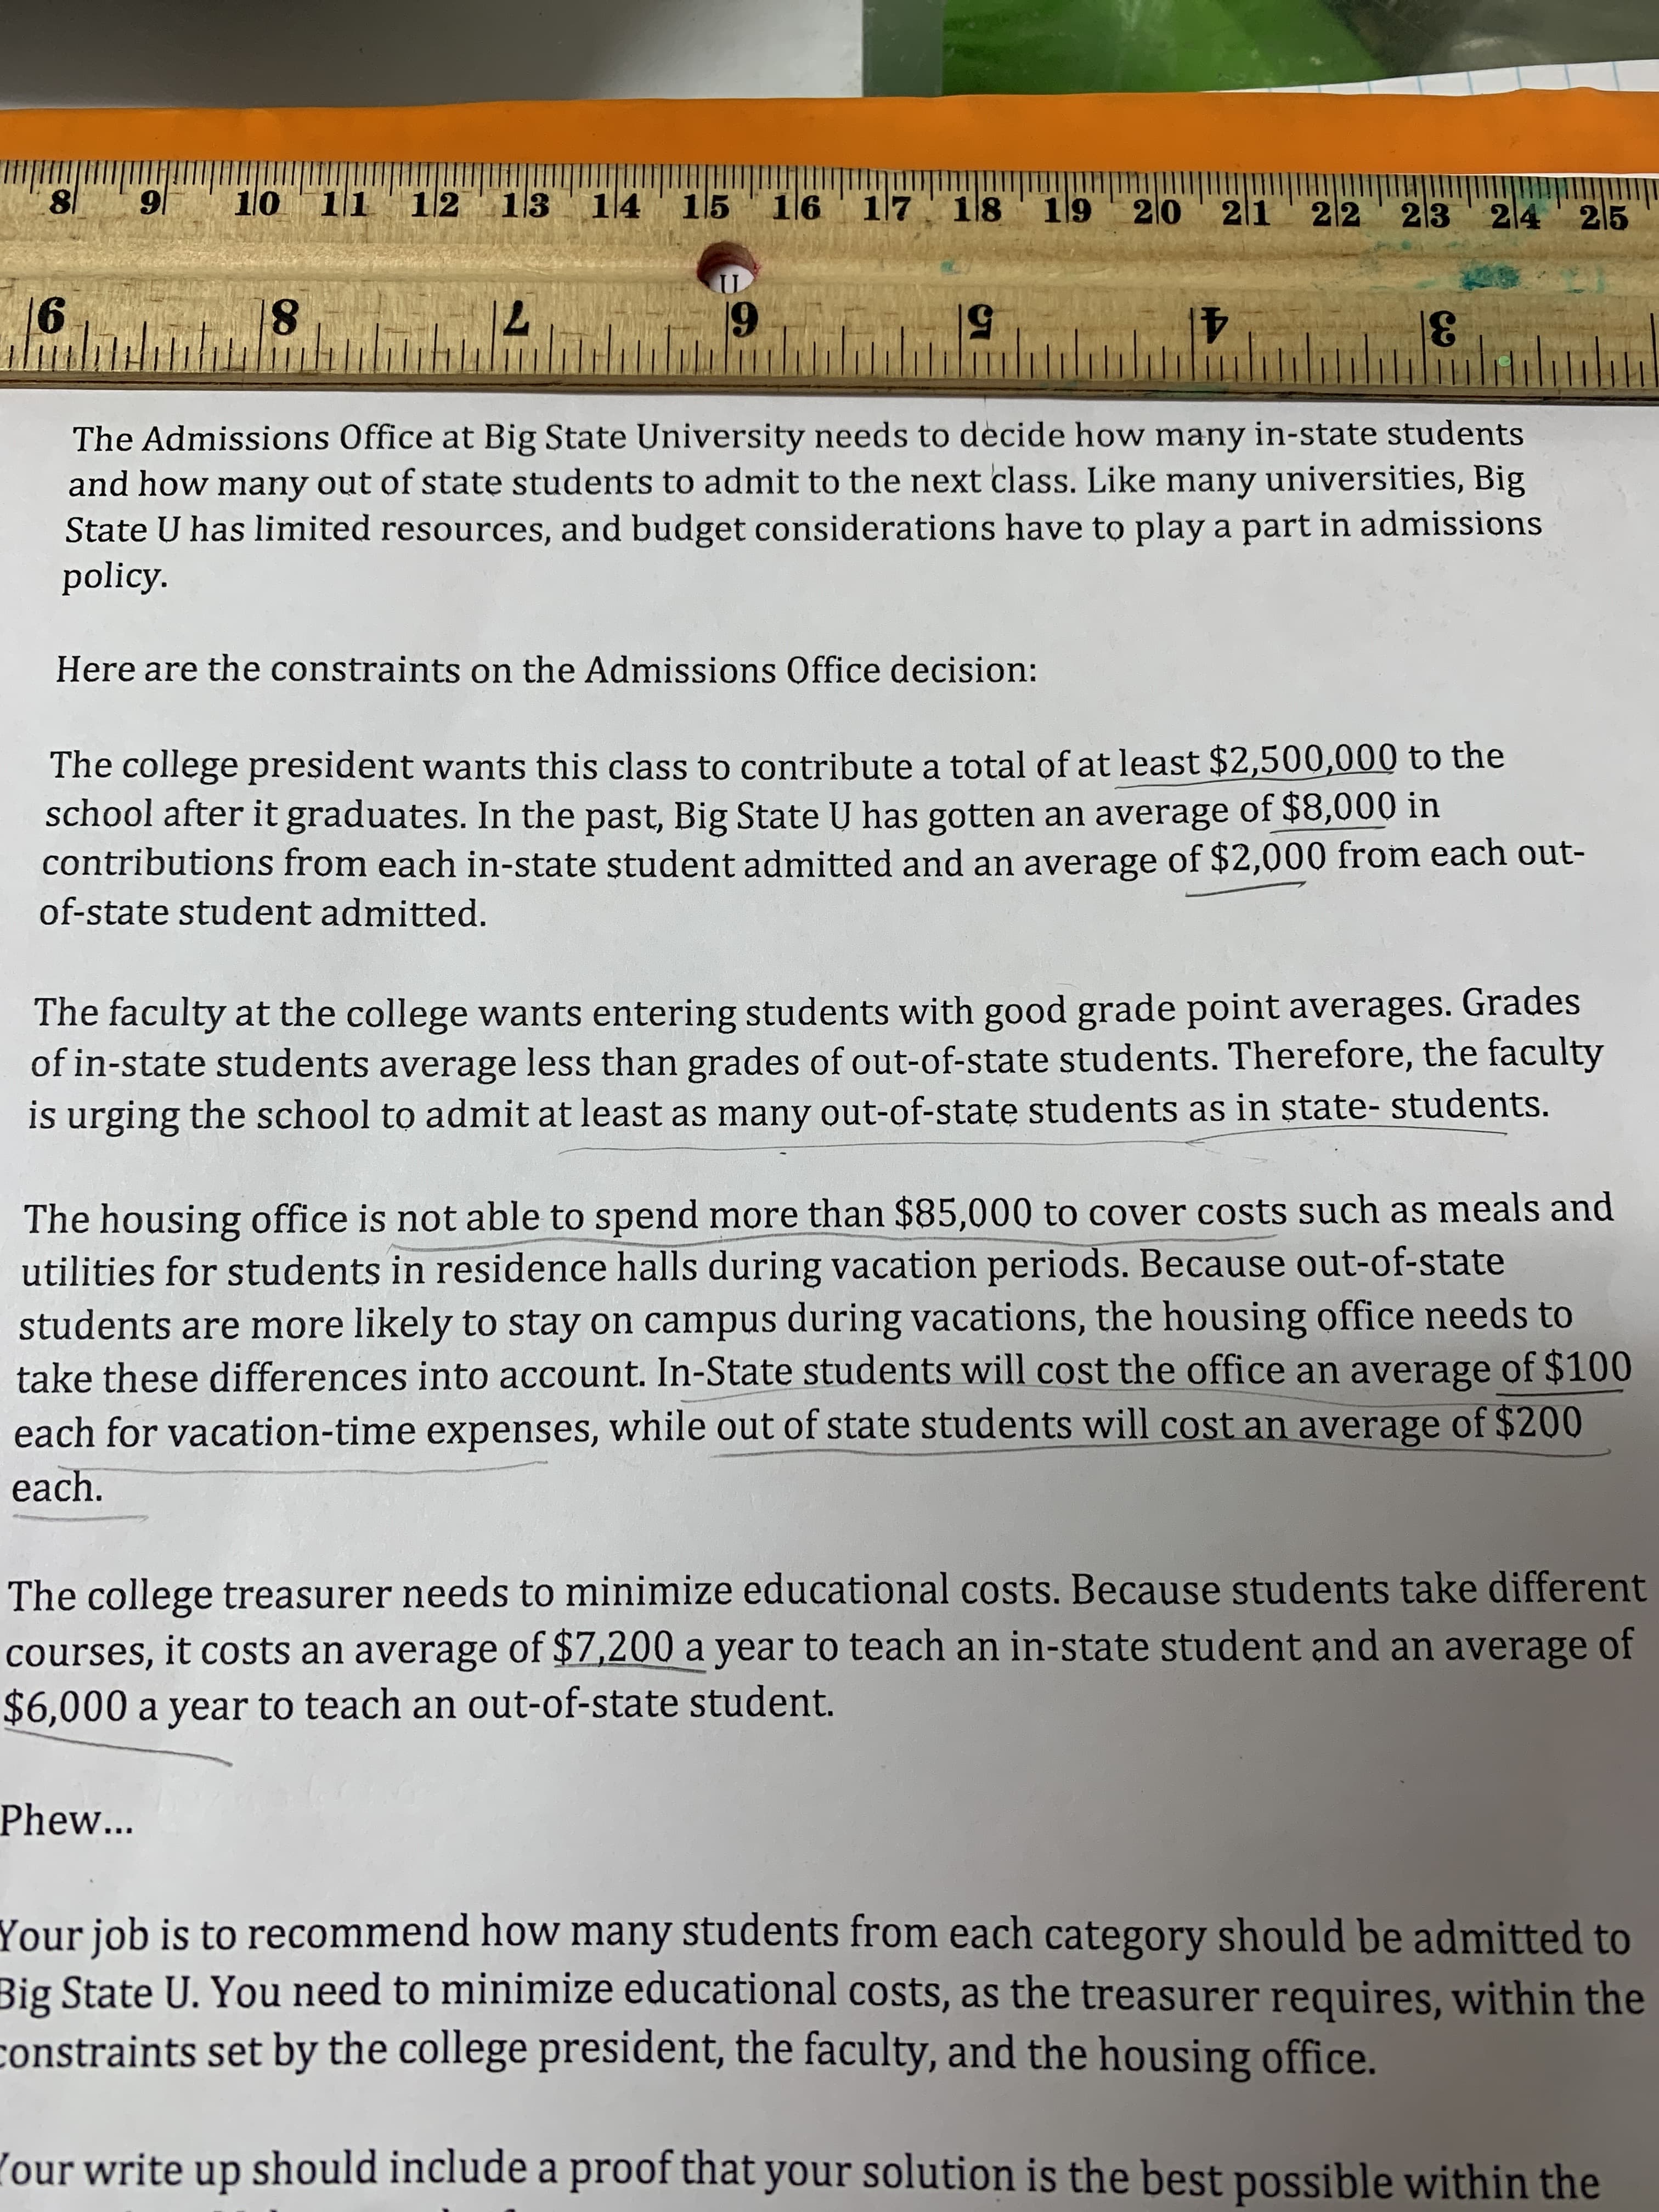 Imi
12 13 14' 15 16 17 18 19
|6
10 11
20 ' 21' 22'
23 24' 25
18
71
6
50
41
31
The Admissions Office at Big State University needs to decide how many in-state students
and how many out of state students to admit to the next class. Like many universities, Big
State U has limited resources, and budget considerations have to play a part in admissions
policy.
Here are the constraints on the Admissions Office decision:
The college president wants this class to contribute a total of at least $2,500,000 to the
school after it graduates. In the past, Big State U has gotten an average of $8,000 in
contributions from each in-state student admitted and an average of $2,000 from each out-
of-state student admitted.
The faculty at the college wants entering students with good grade point averages. Grades
of in-state students average less than grades of out-of-state students. Therefore, the faculty
is urging the school to admit at least as many out-of-statę students as in ștate- students.
The housing office is not able to spend more than $85,000 to cover costs such as meals and
utilities for students in residence halls during vacation periods. Because out-of-state
students are more likely to stay on campus during vacations, the housing office needs to
take these differences into account. In-State students will cost the office an average of $100
each for vacation-time expenses, while out of state students will cost an average of $200
each.
The college treasurer needs to minimize educational costs. Because students take different
courses, it costs an average of $7,200 a year to teach an in-state student and an average of
$6,000 a year to teach an out-of-state student.
Phew...
Your job is to recommend how many students from each category should be admitted to
Big State U. You need to minimize educational costs, as the treasurer requires, within the
constraints set by the college president, the faculty, and the housing office.
(our write up should include a proof that your solution is the best possible within the
